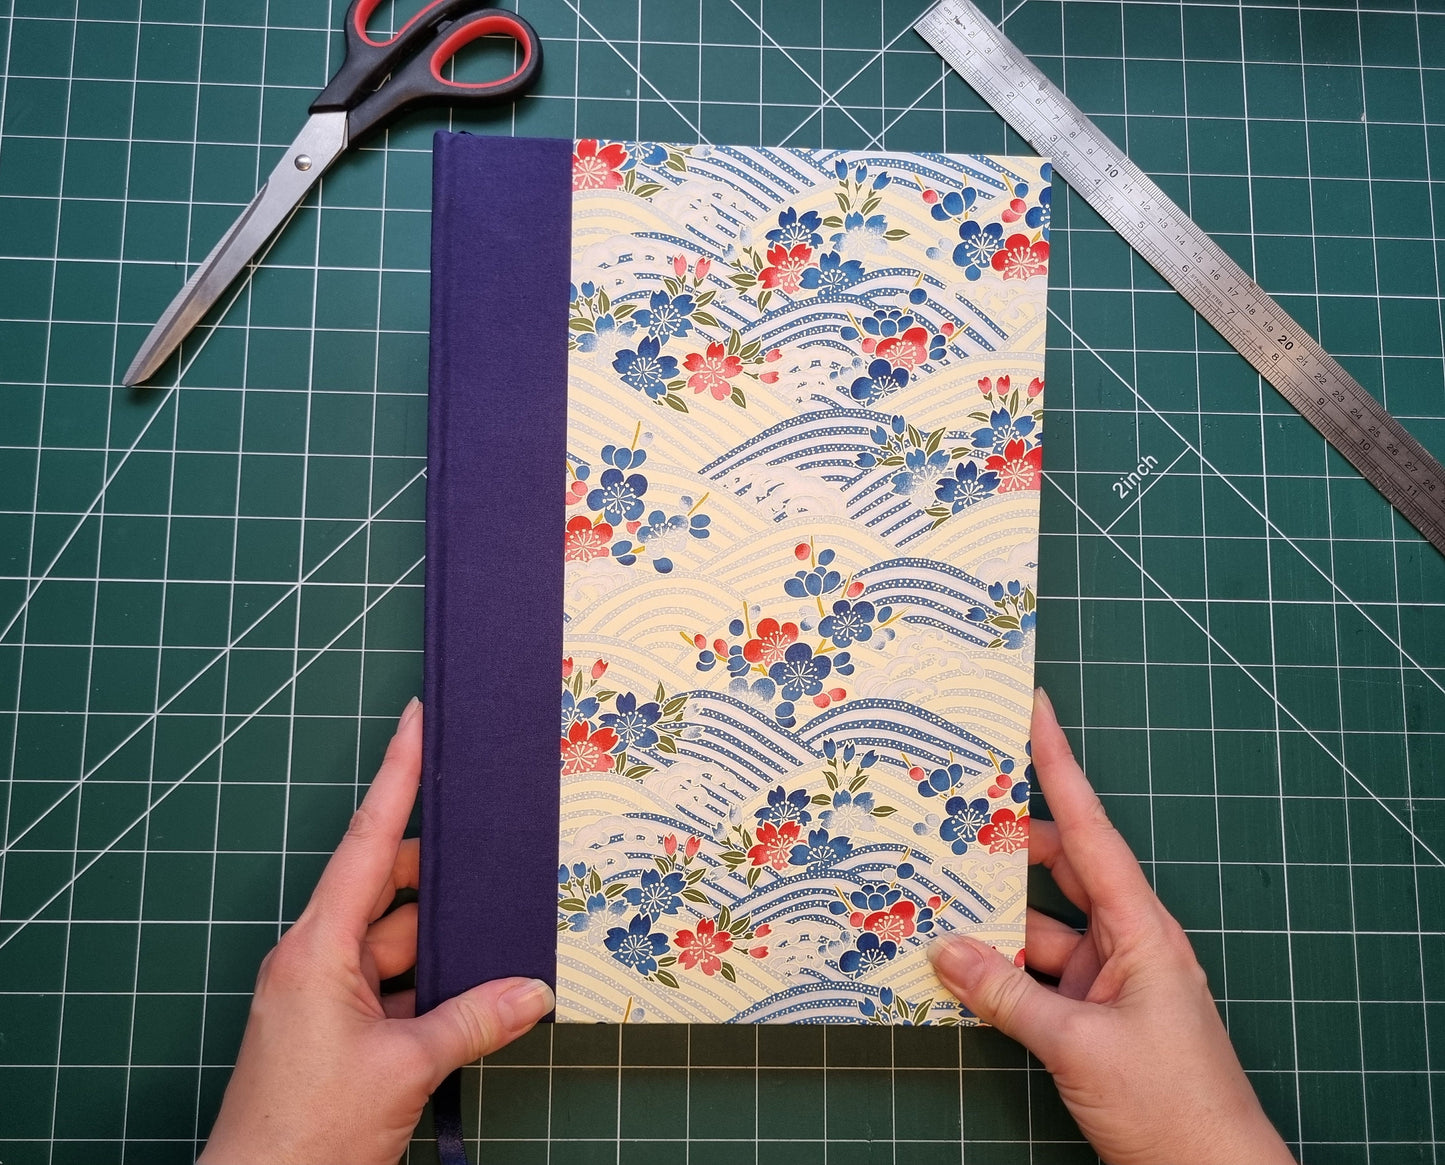 Handmade A4 Sketchbook | 120gsm Paper | Chiyogami Waves Design with Ribbon Bookmark